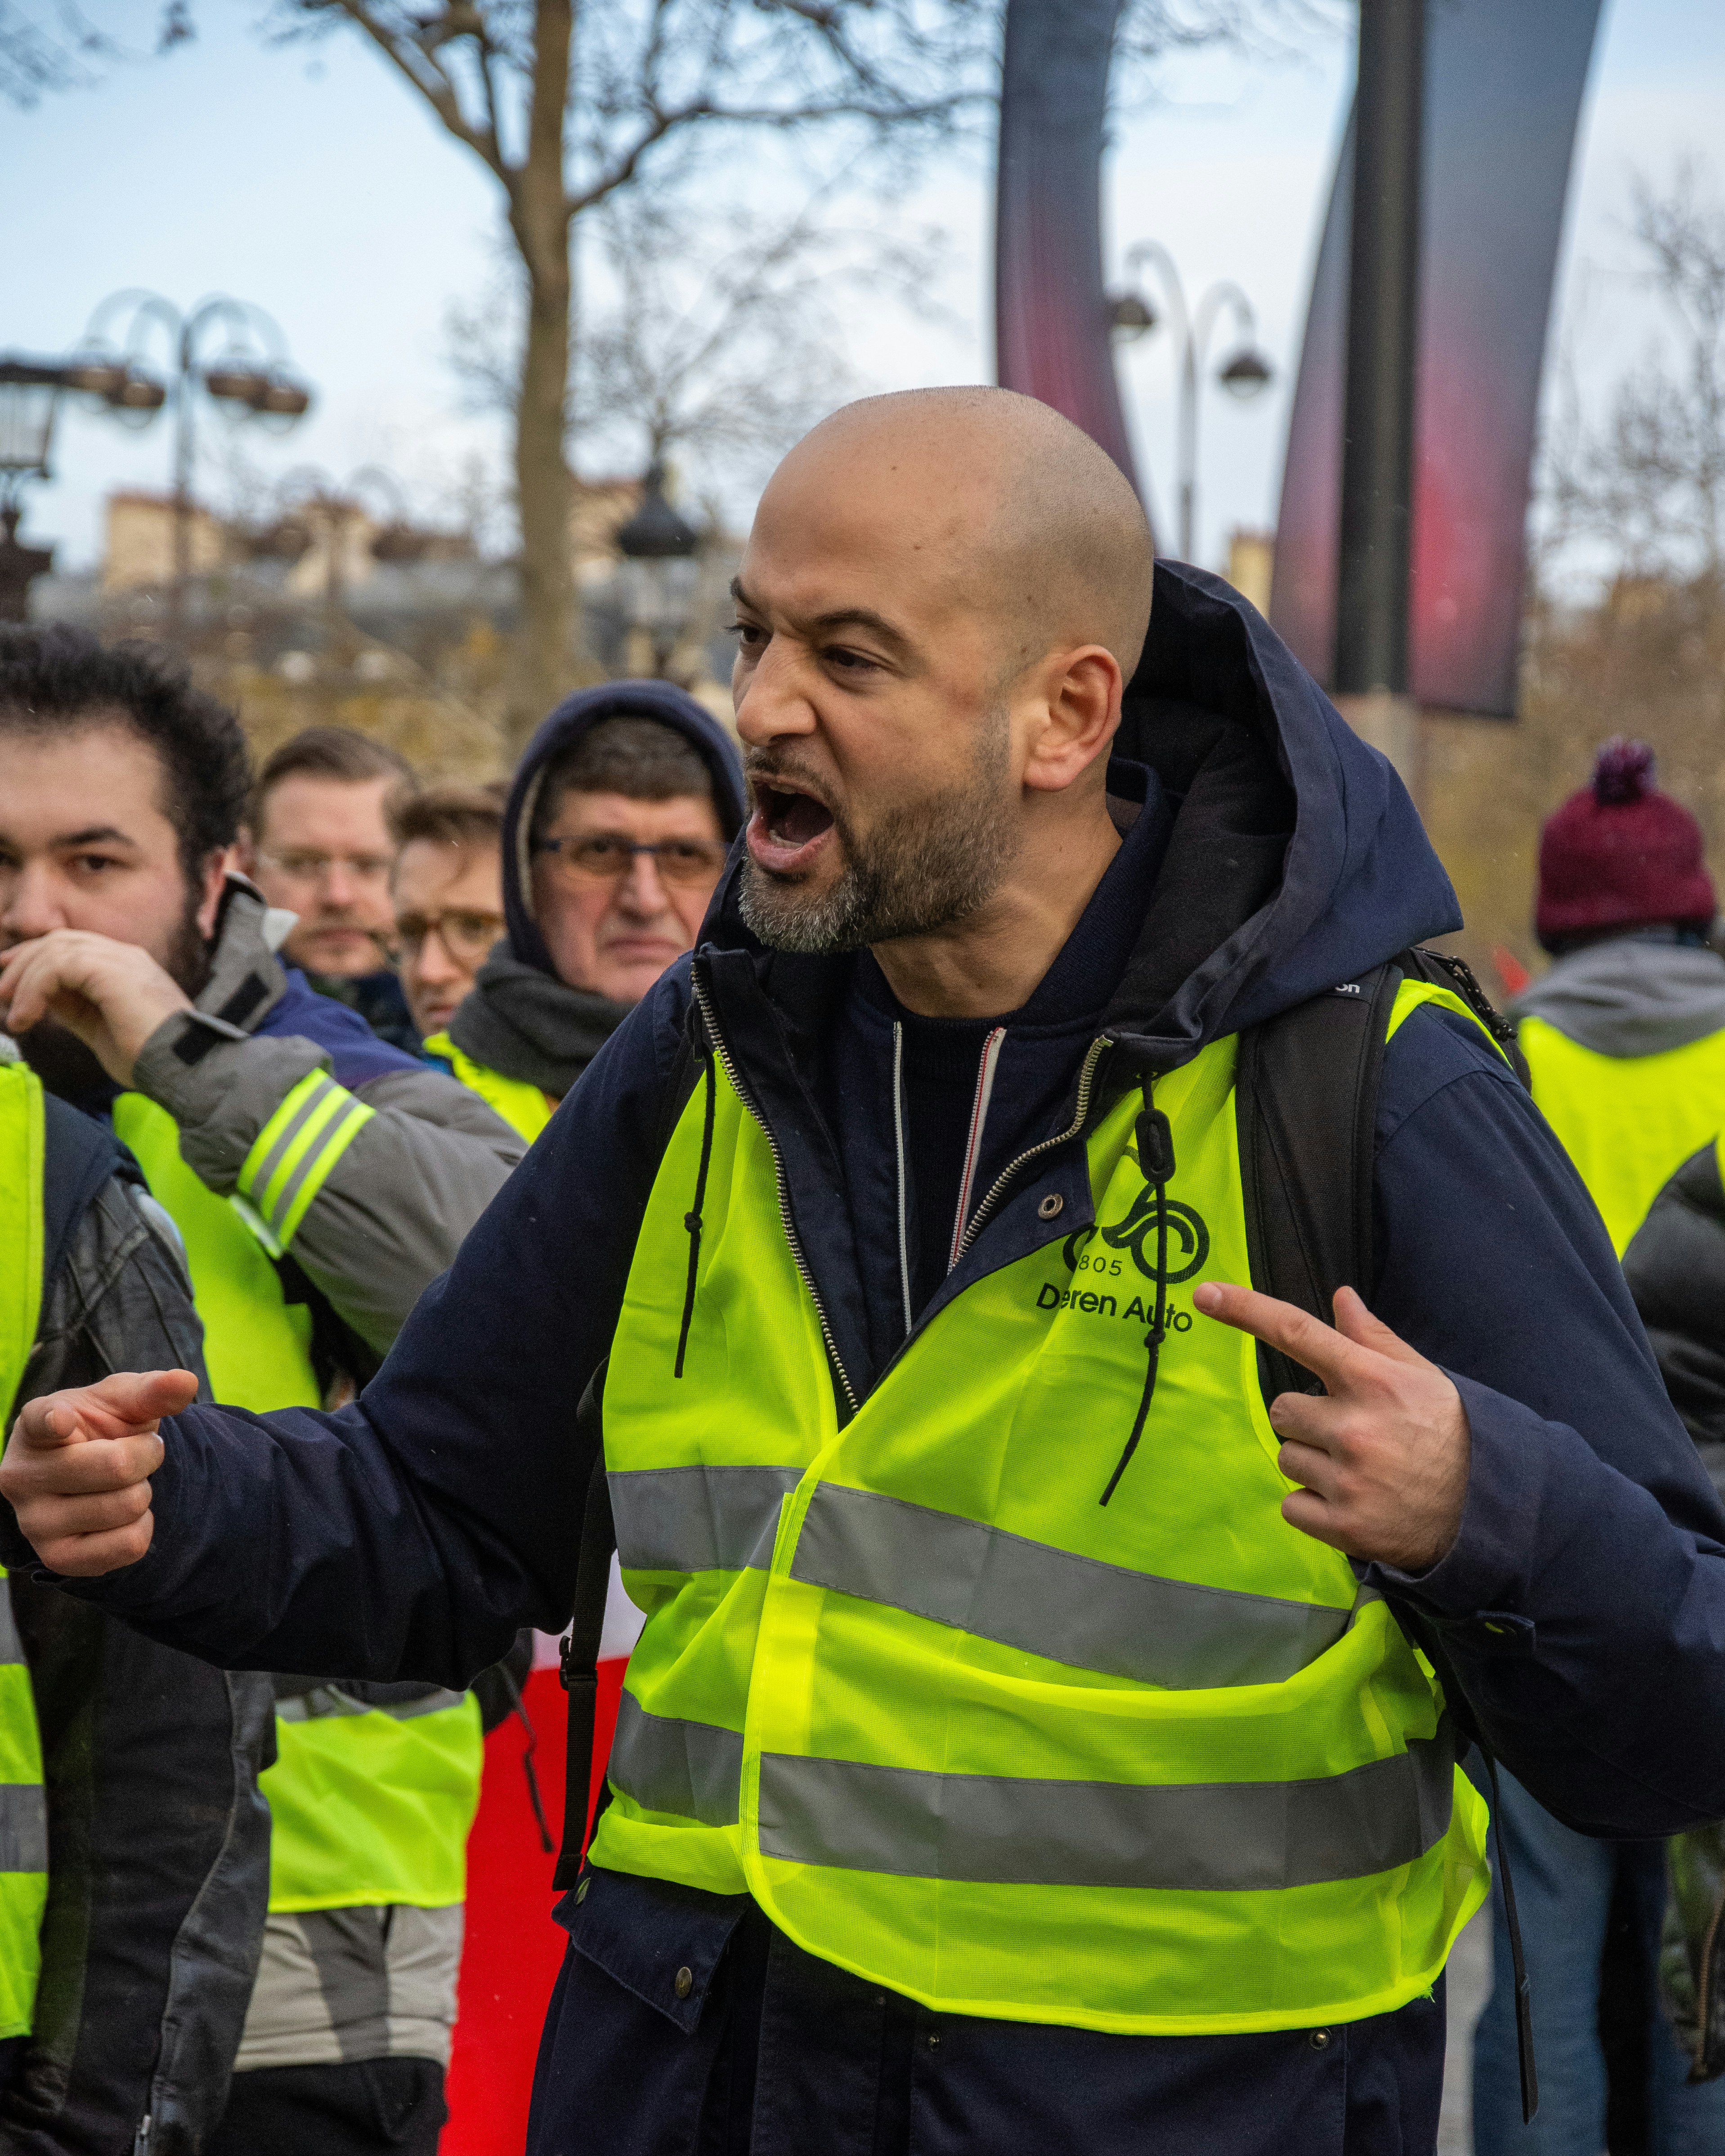 A protester shouts at a journalist during the Gilet Jaune movement’s protest on December 8th.